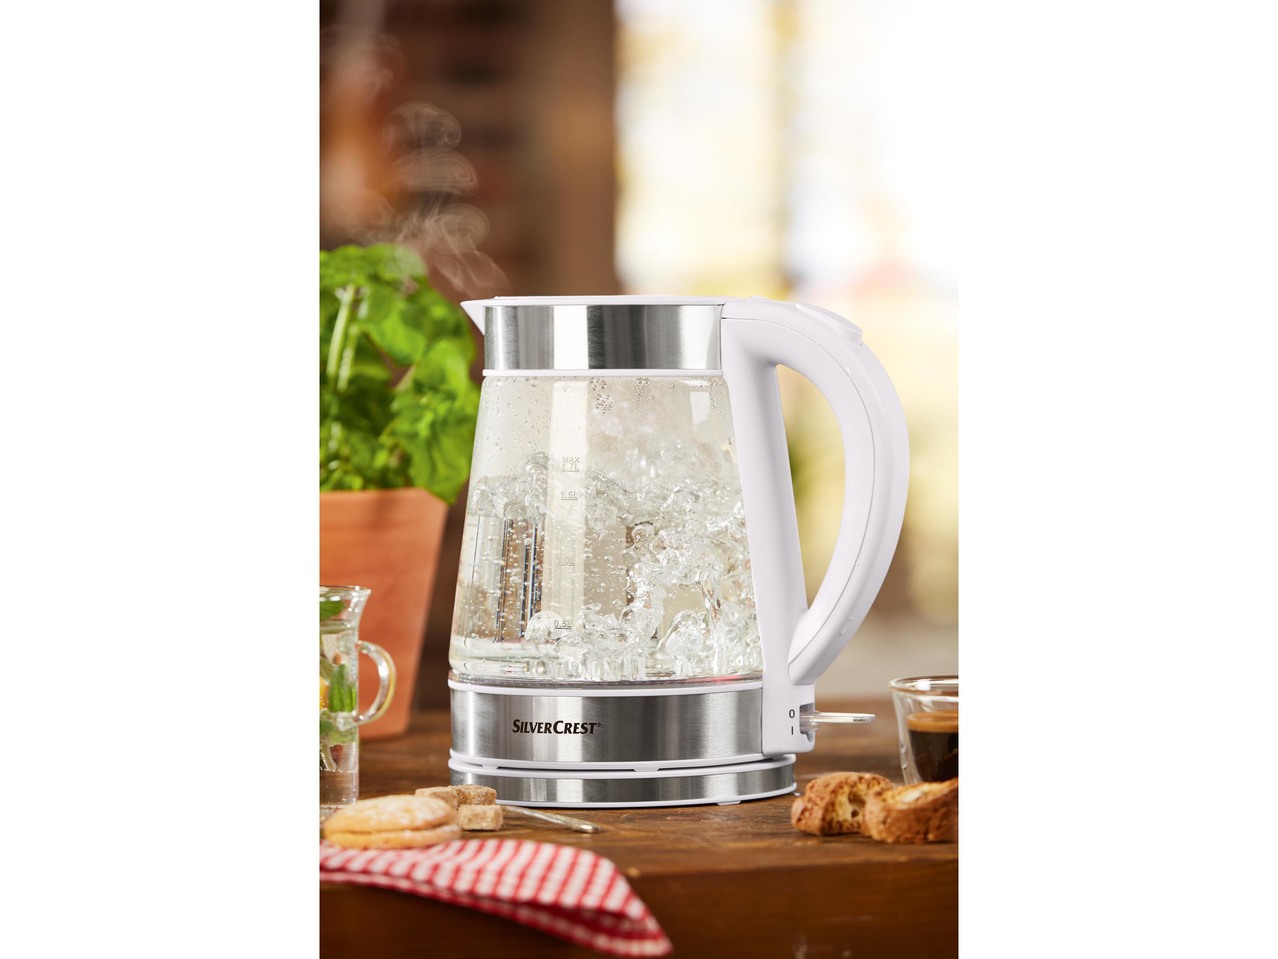 Glass electric Kettle with LED light